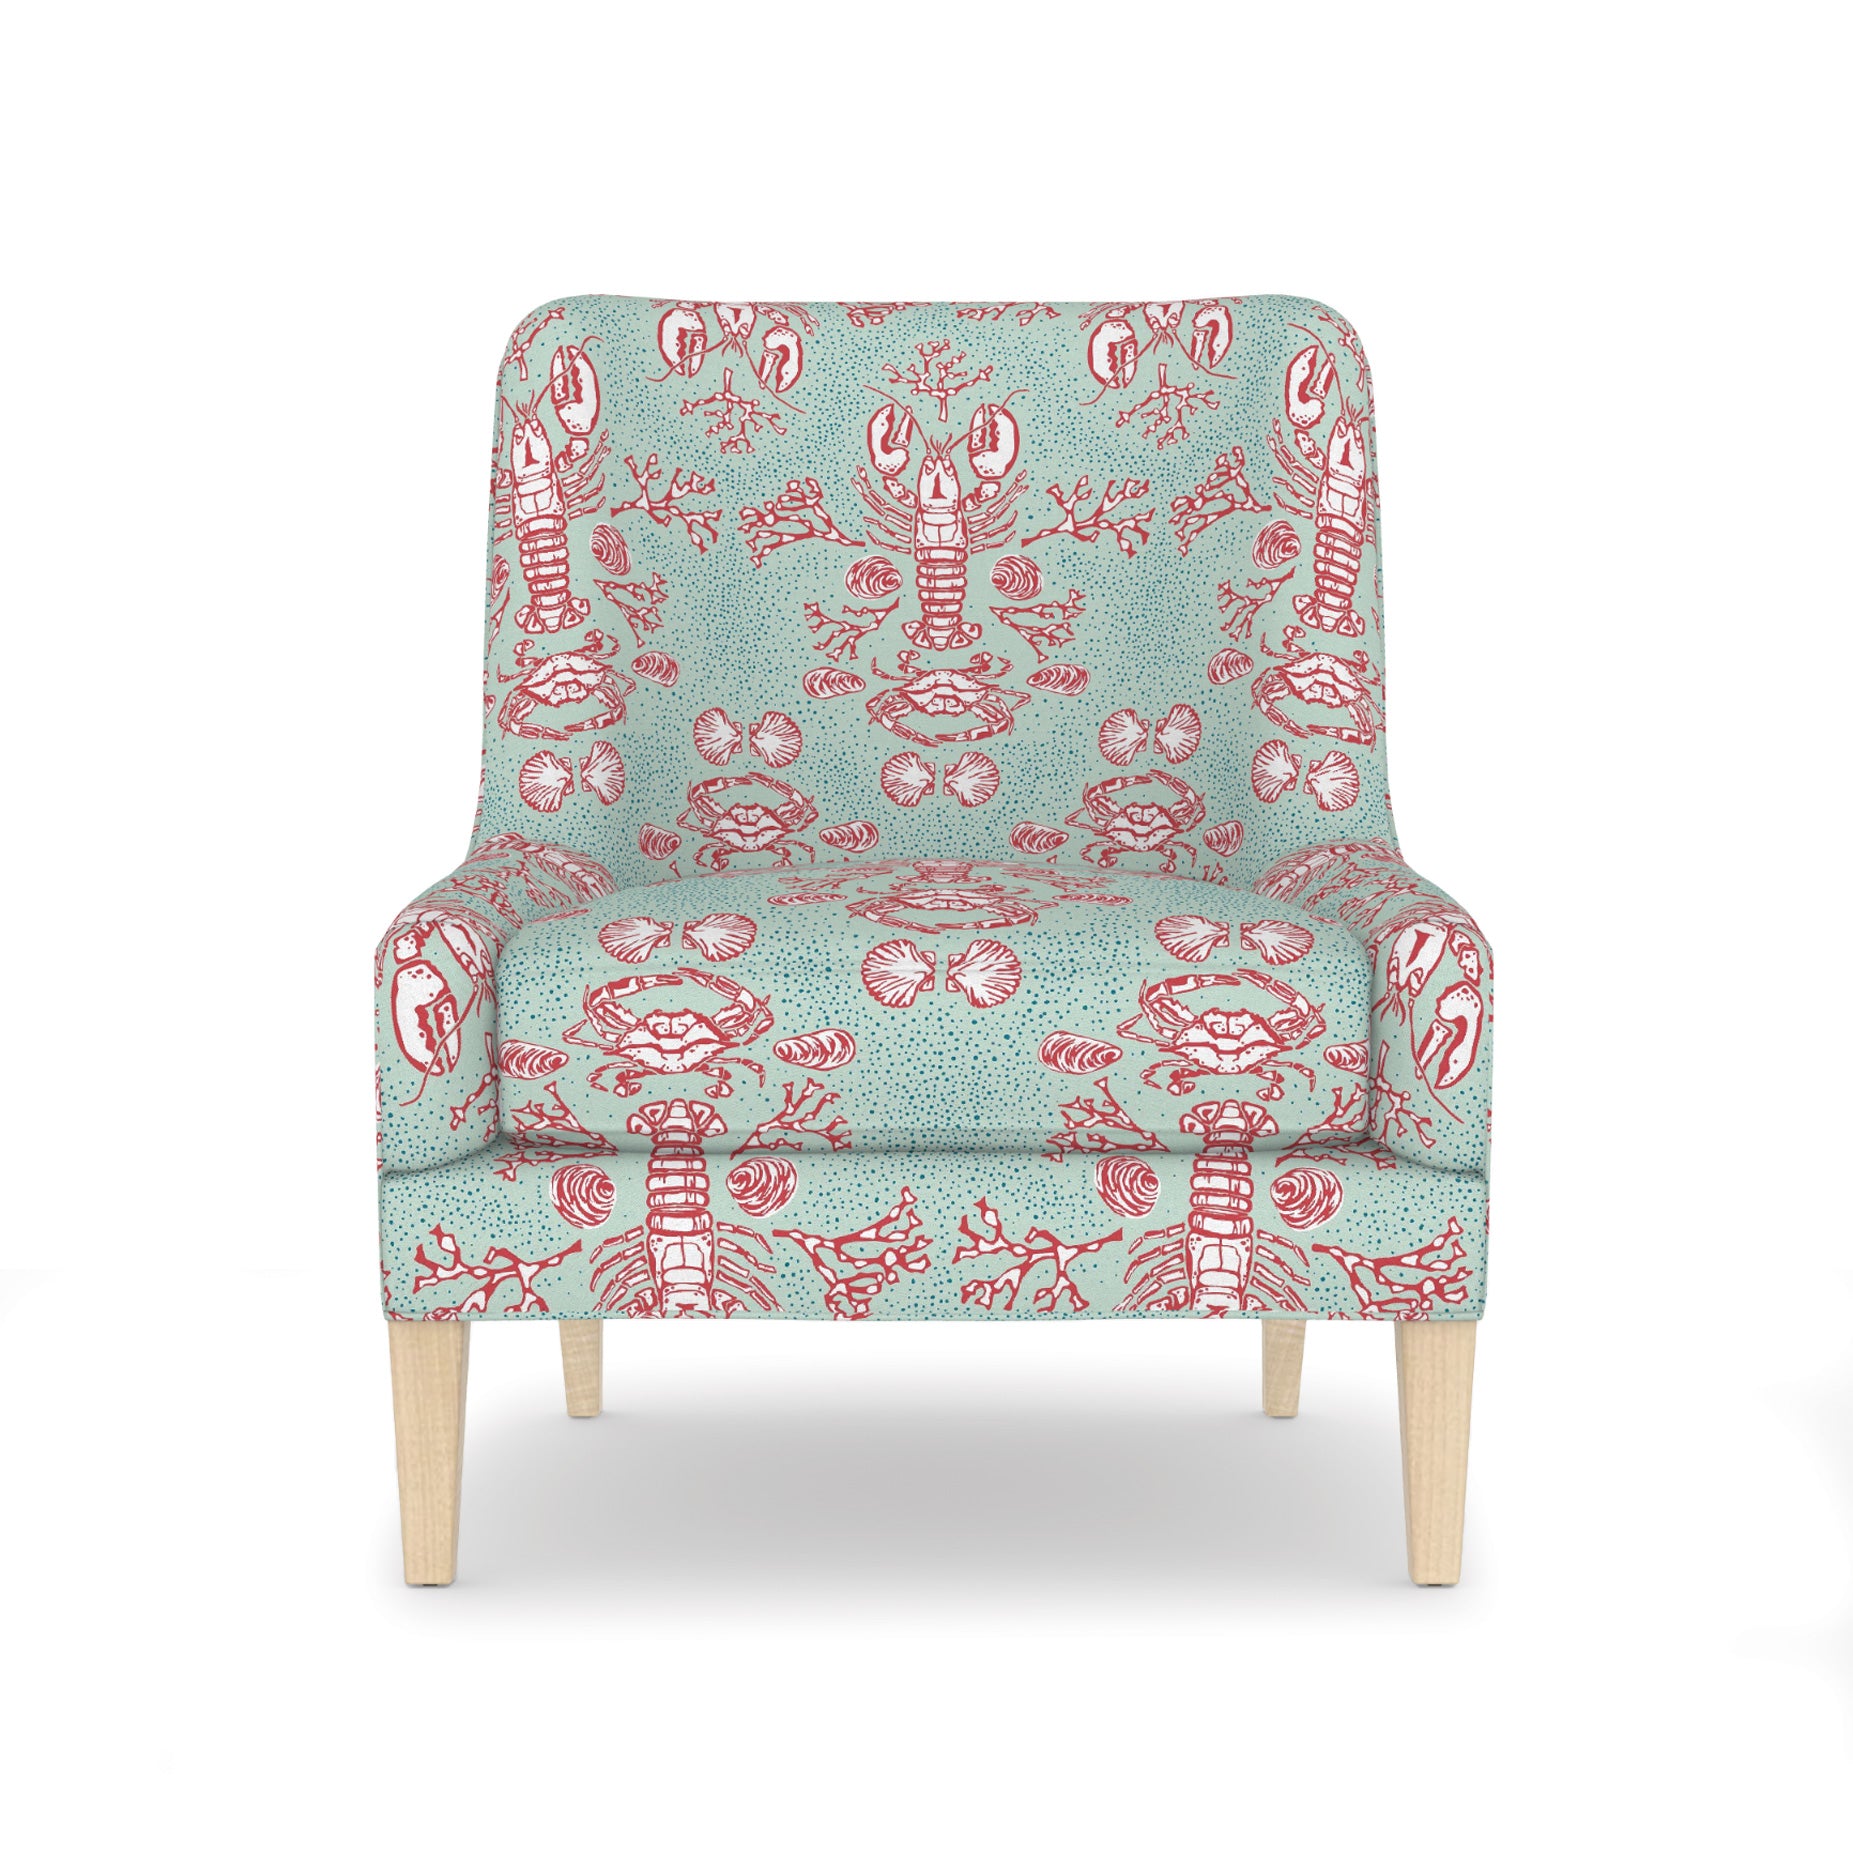 Maine Cottage Hazel Chair | Colorful Armless Chair | Upholstered Coastal Chair  